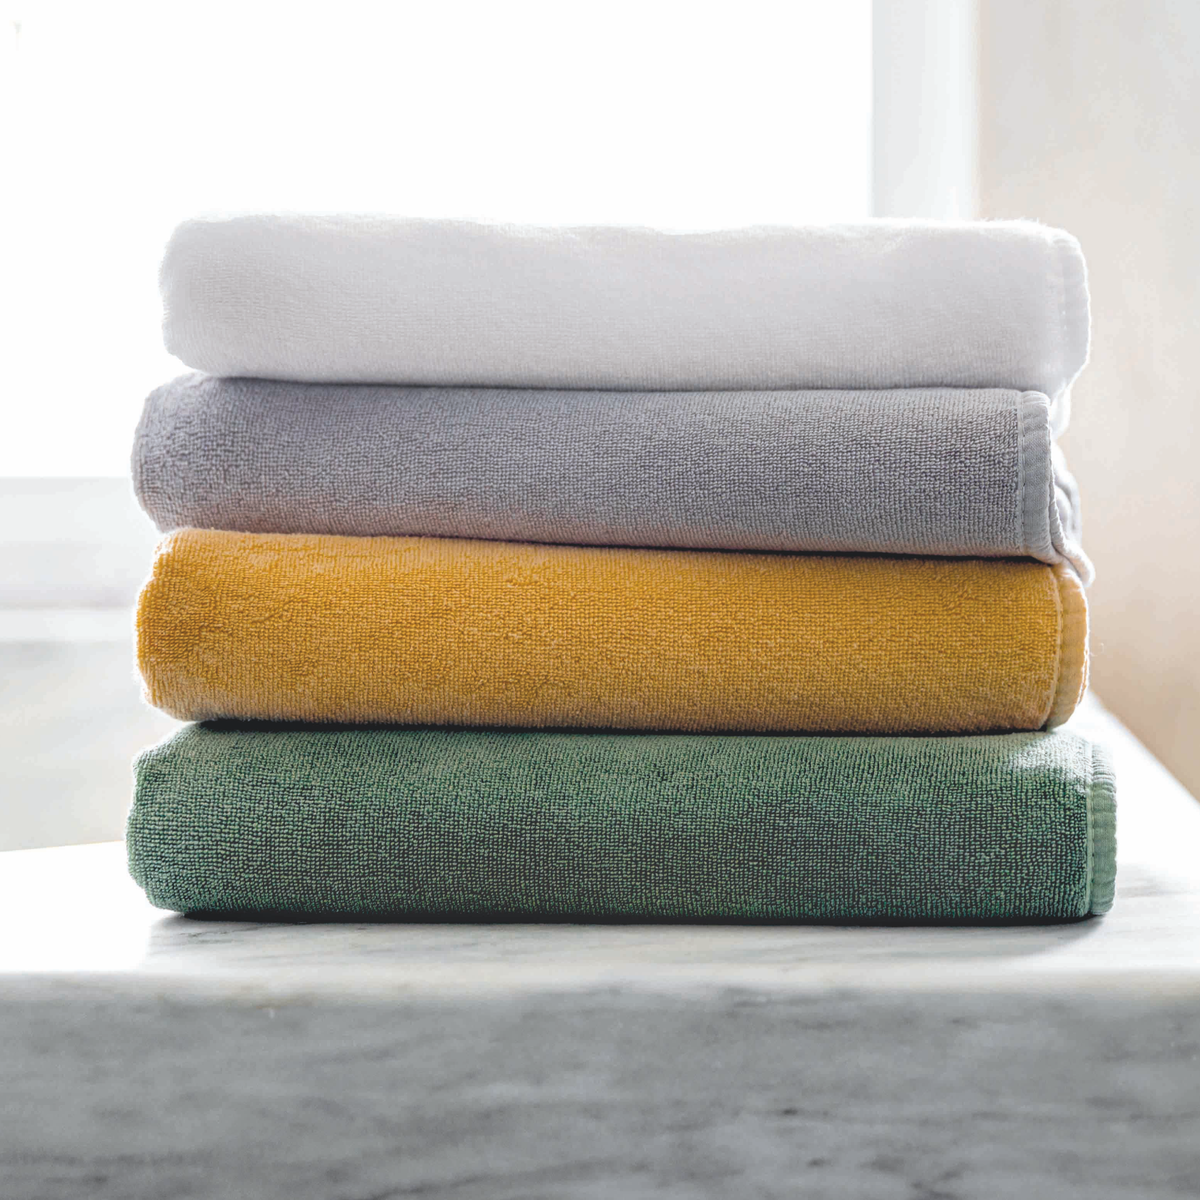 Stack of Graccioza Cool Bath Towels in Different Colors